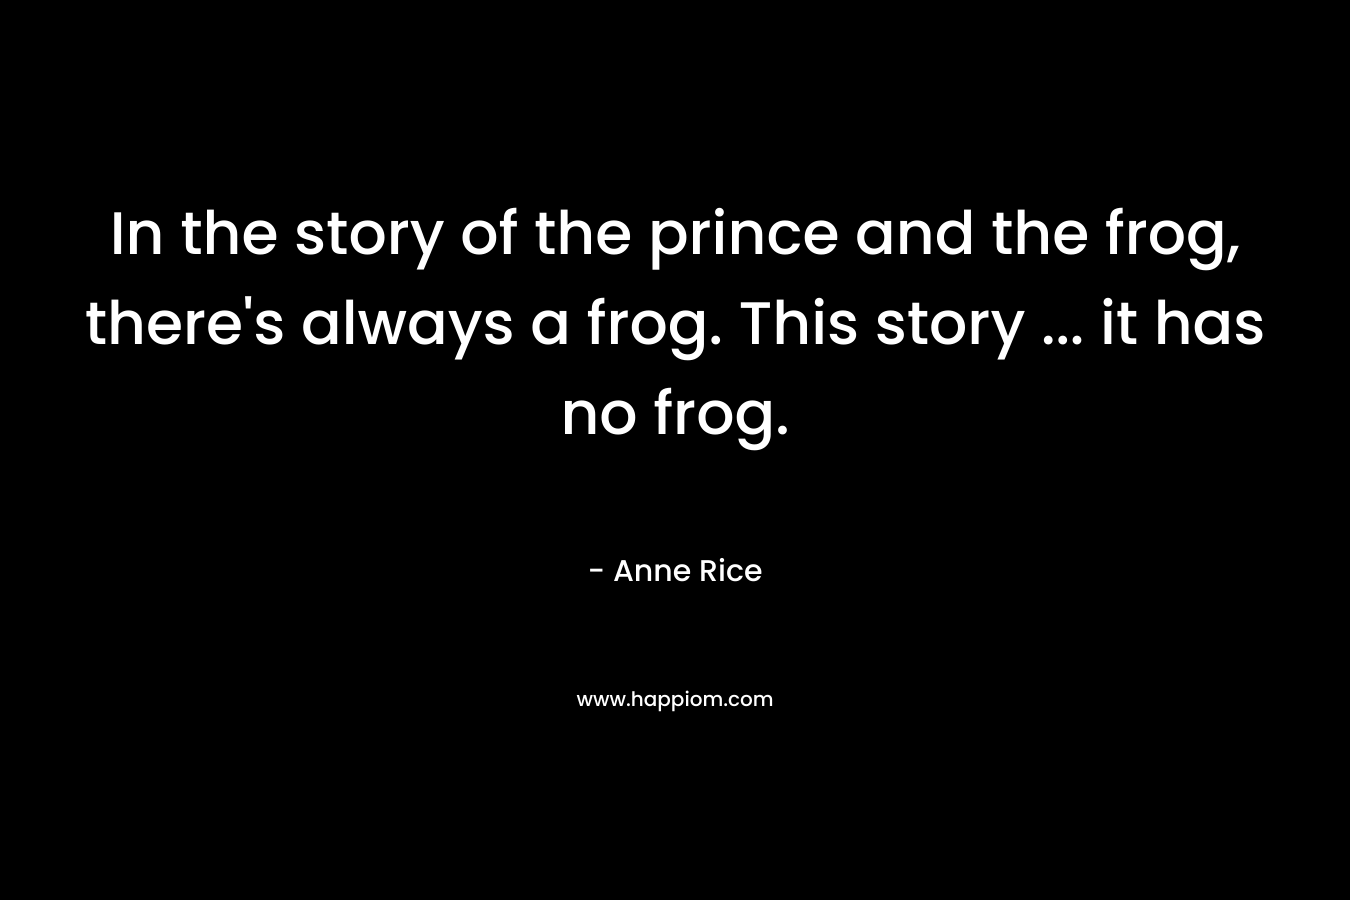 In the story of the prince and the frog, there's always a frog. This story ... it has no frog.